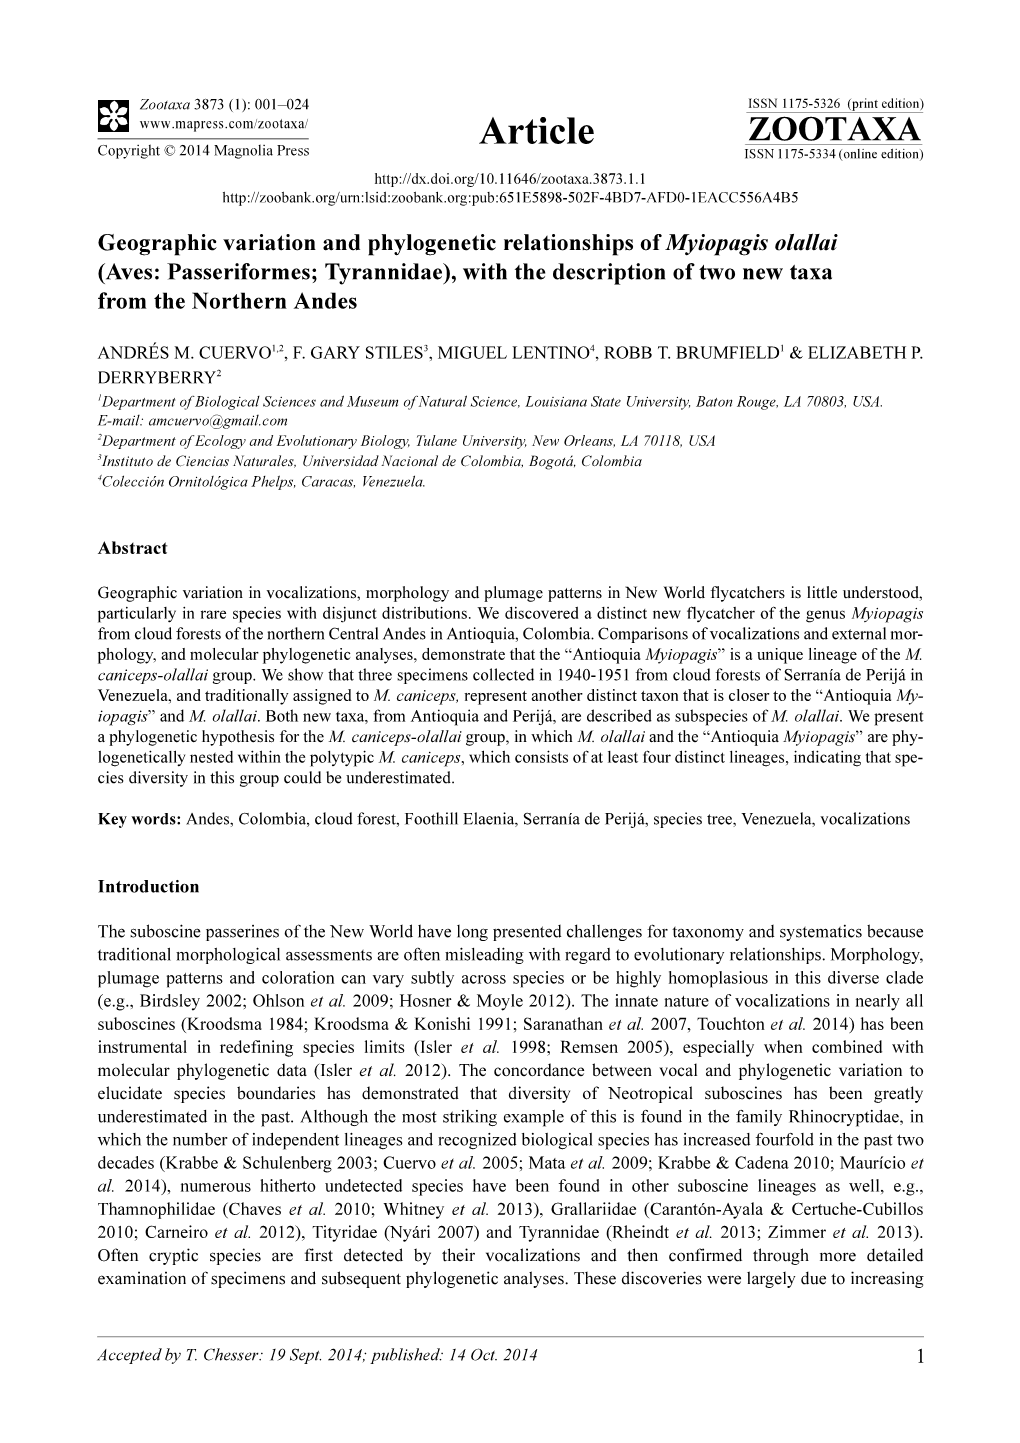 Geographic Variation and Phylogenetic Relationships Of